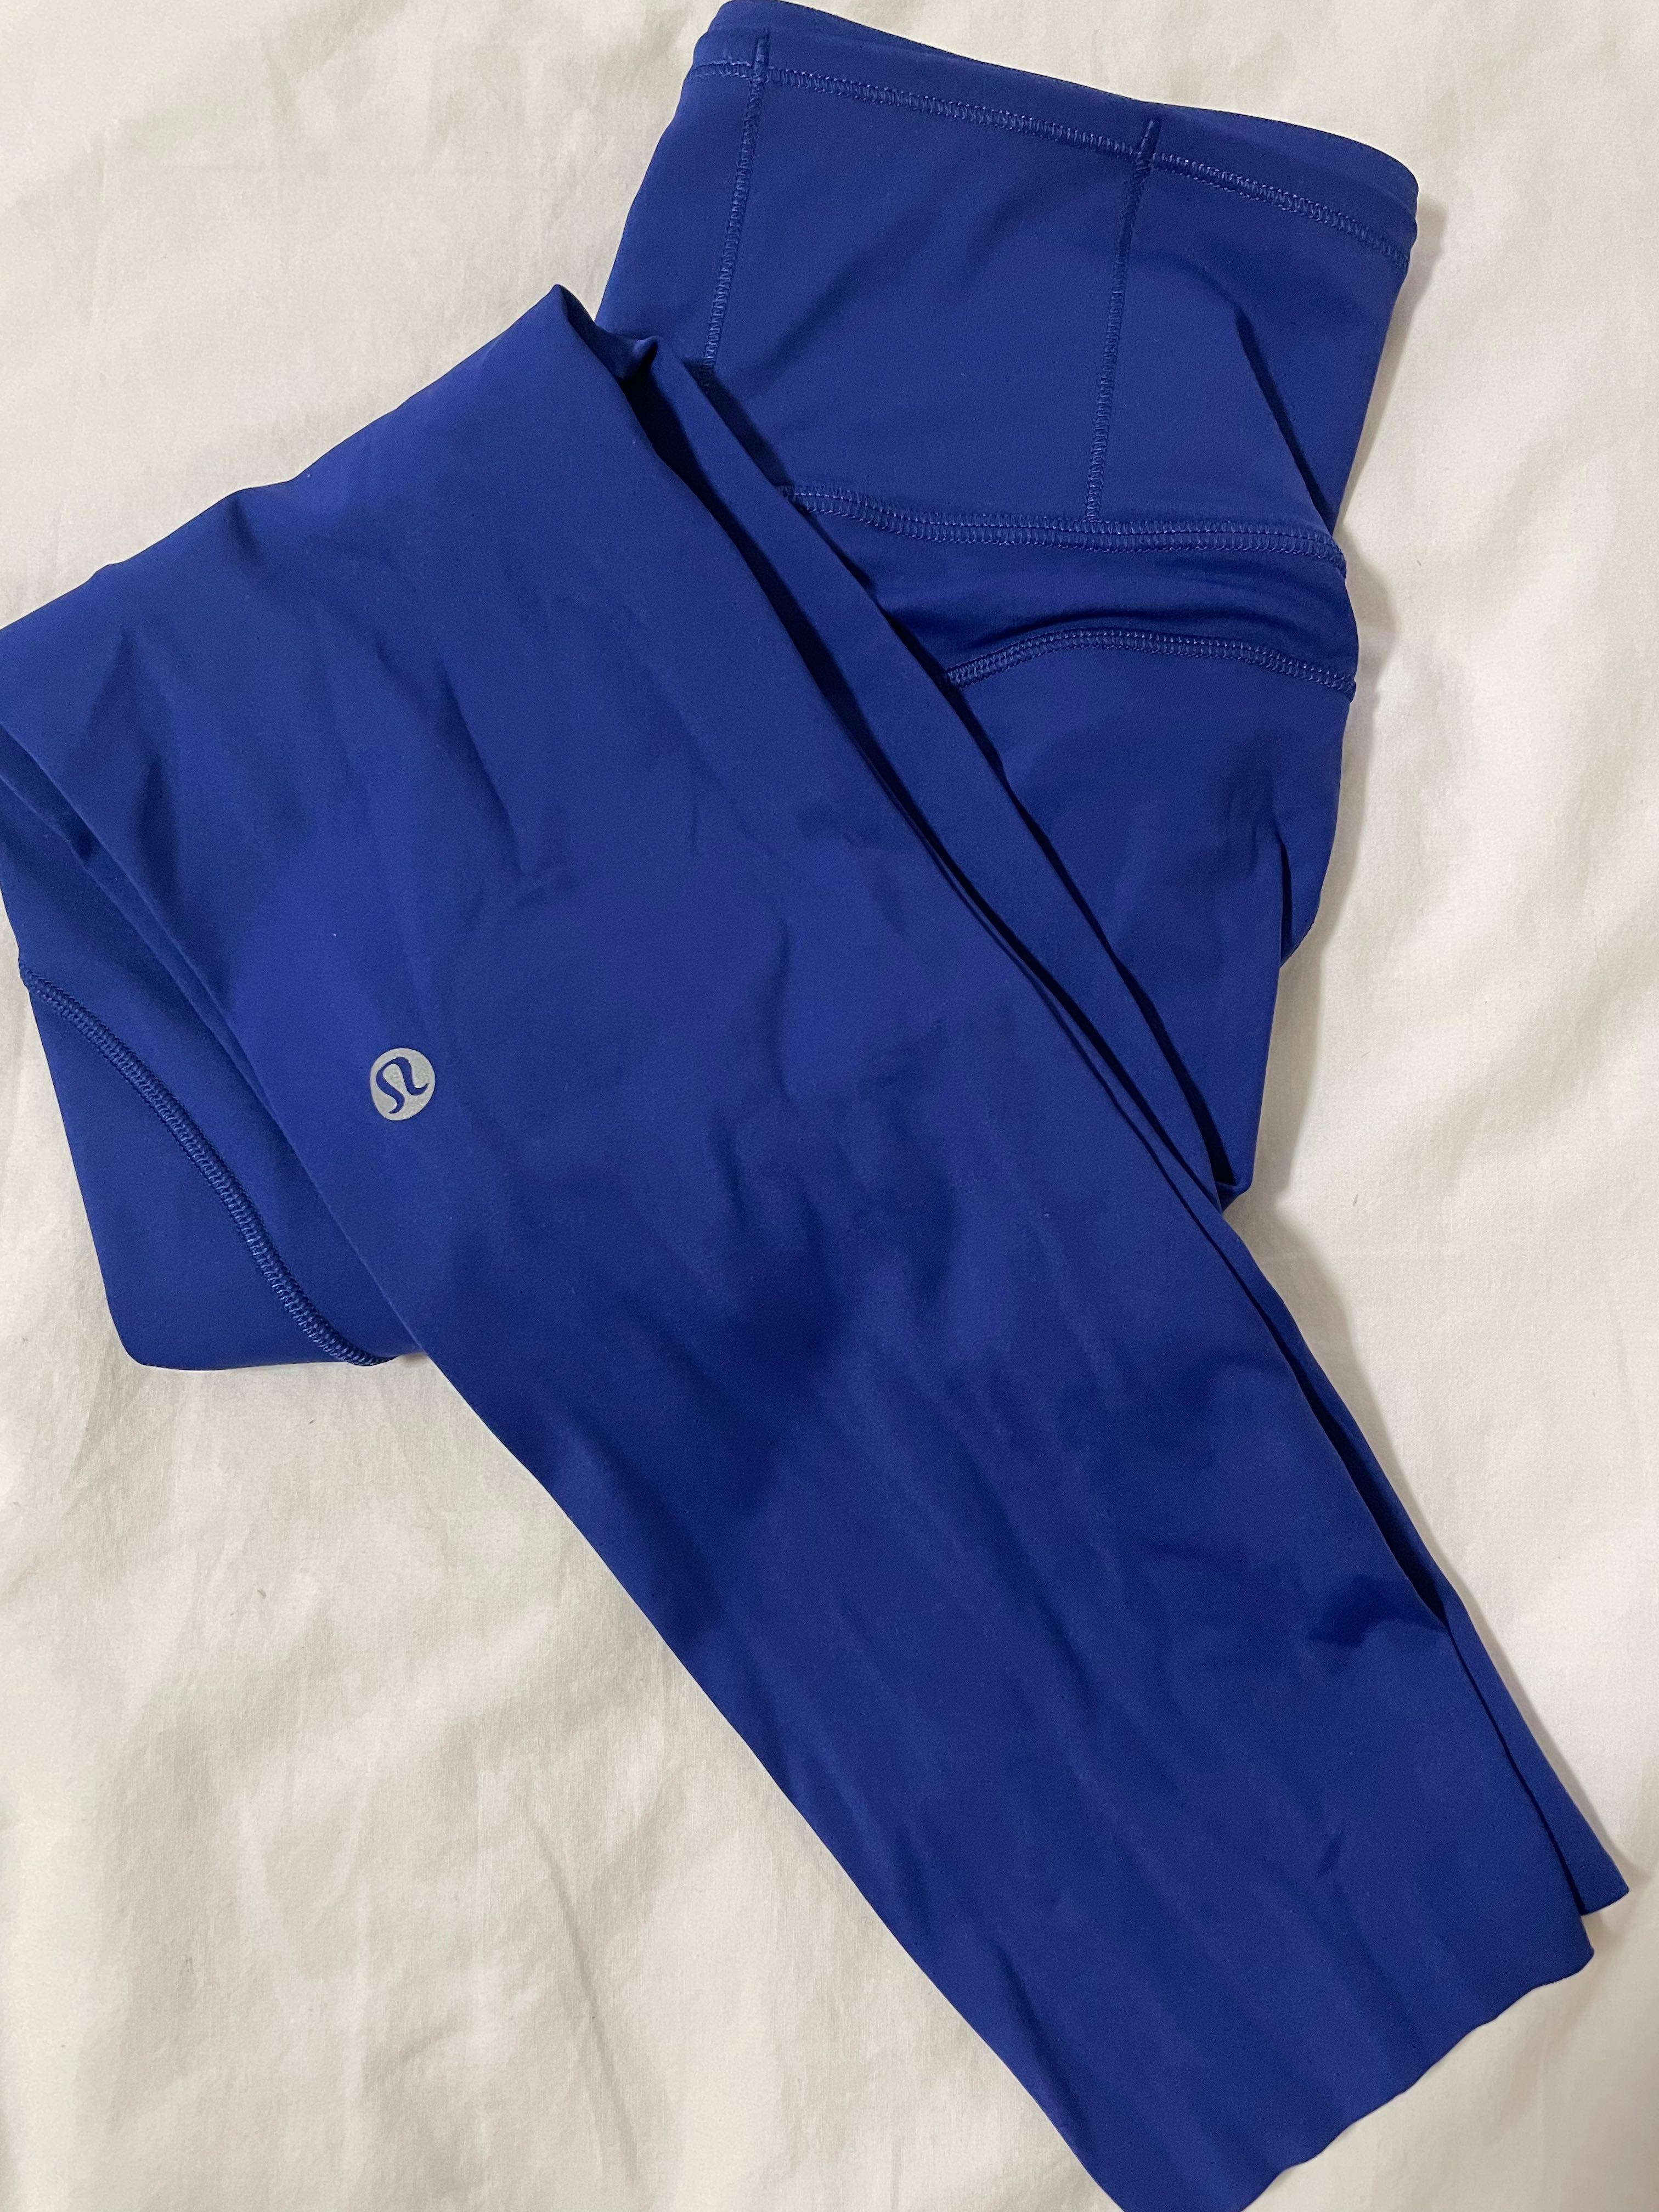 Lululemon Fast and Free Tights 25” Larkspur Size 6